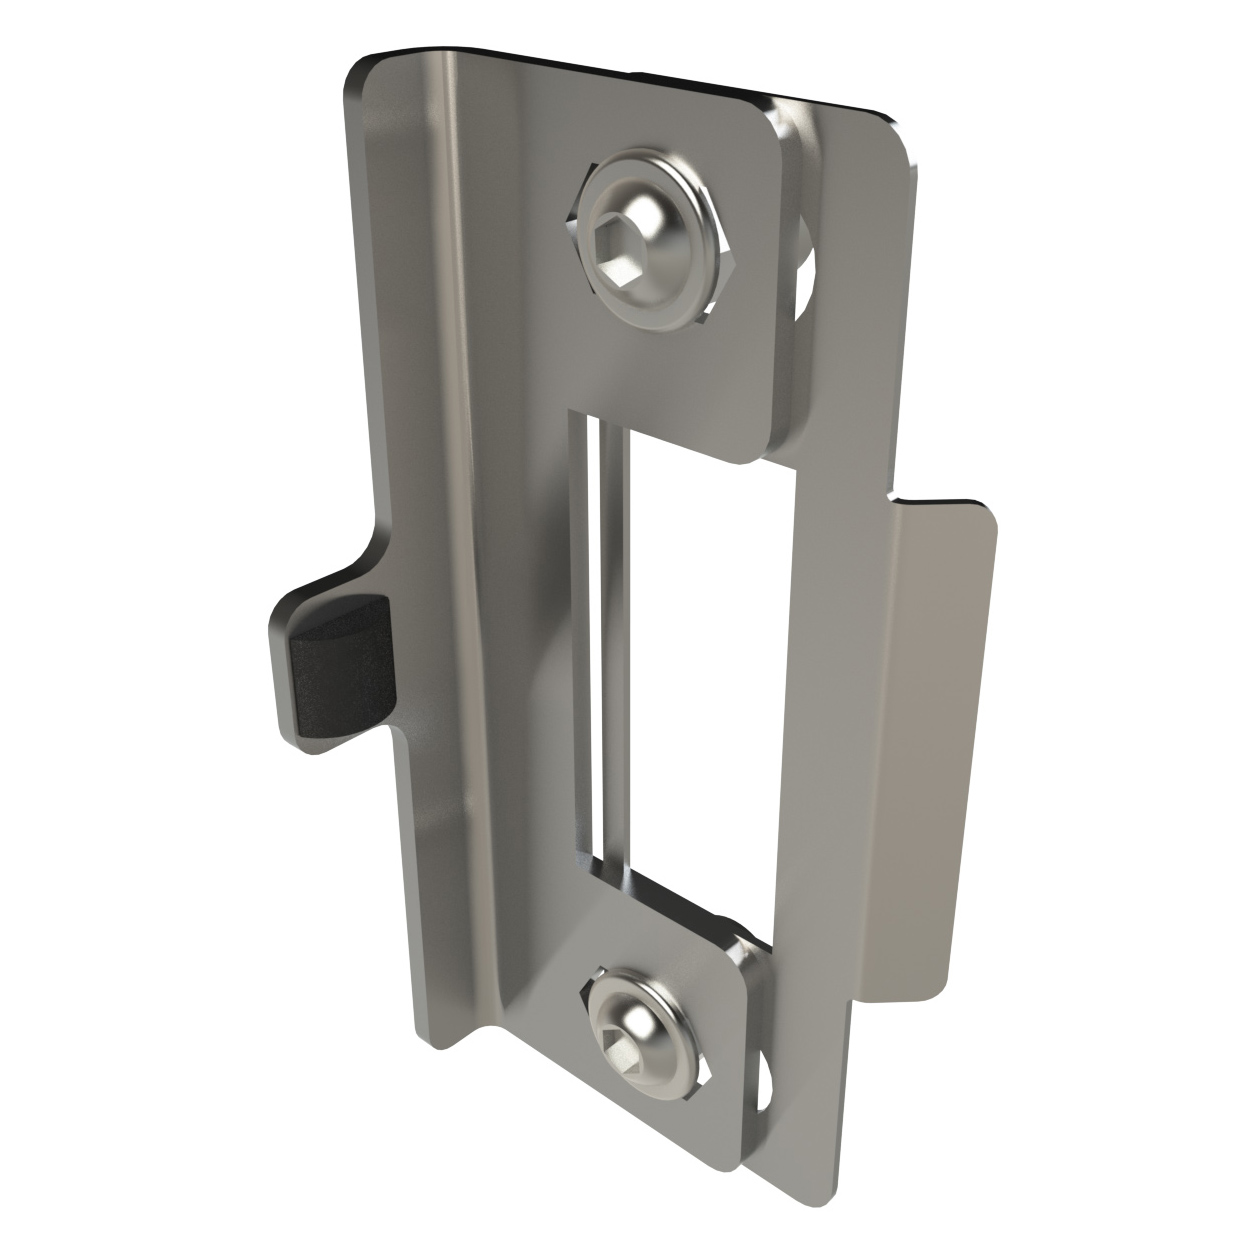 Keep for mortice hook lock with rubber stop